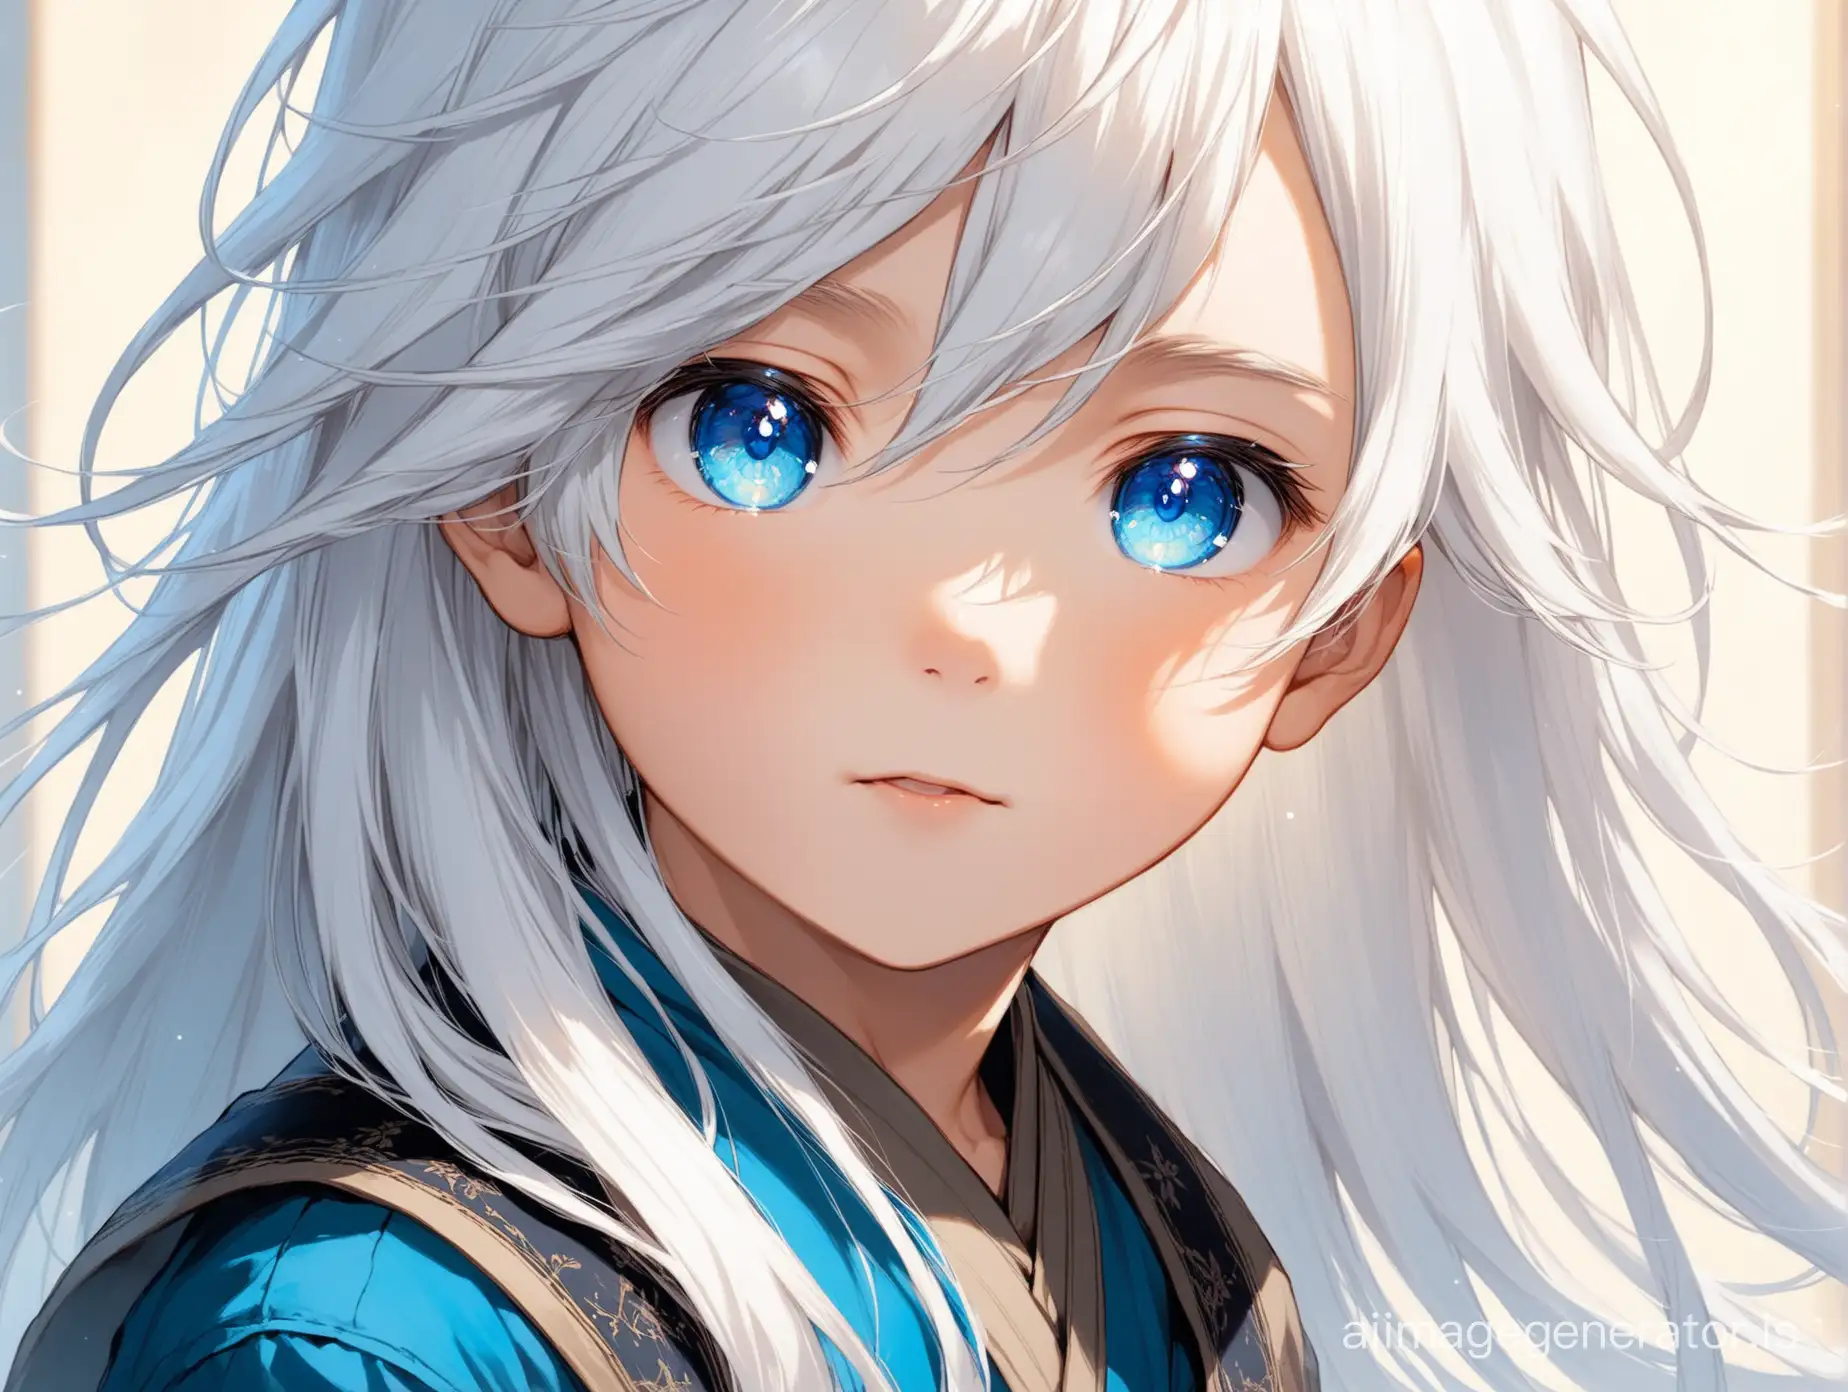 little boy with long white hair and blue eyes